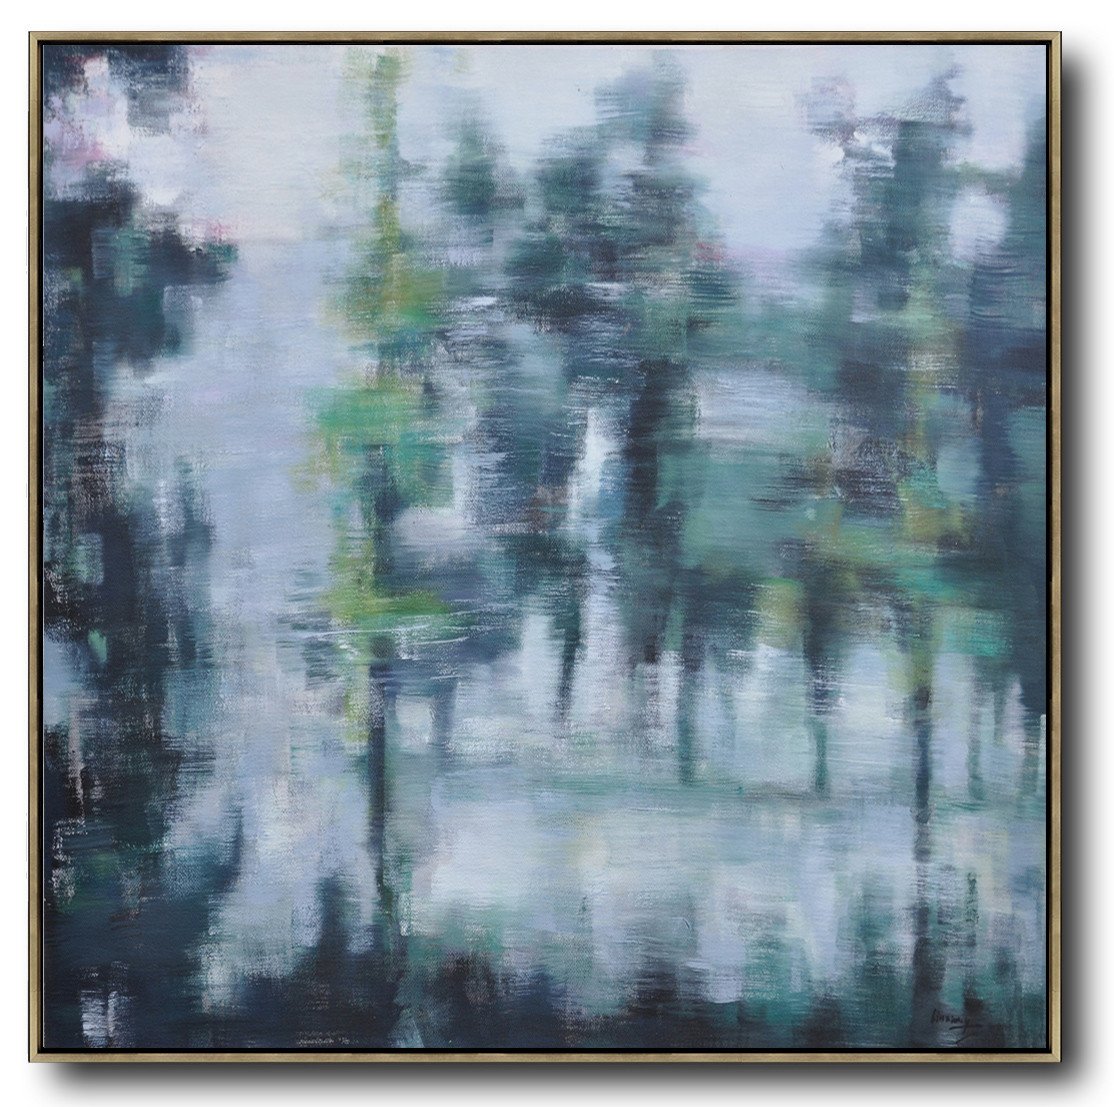 Large Abstract Painting Canvas Art,Abstract Landscape Oil Painting,Acrylic Minimailist Painting,White,Grey,Dark Green.etc